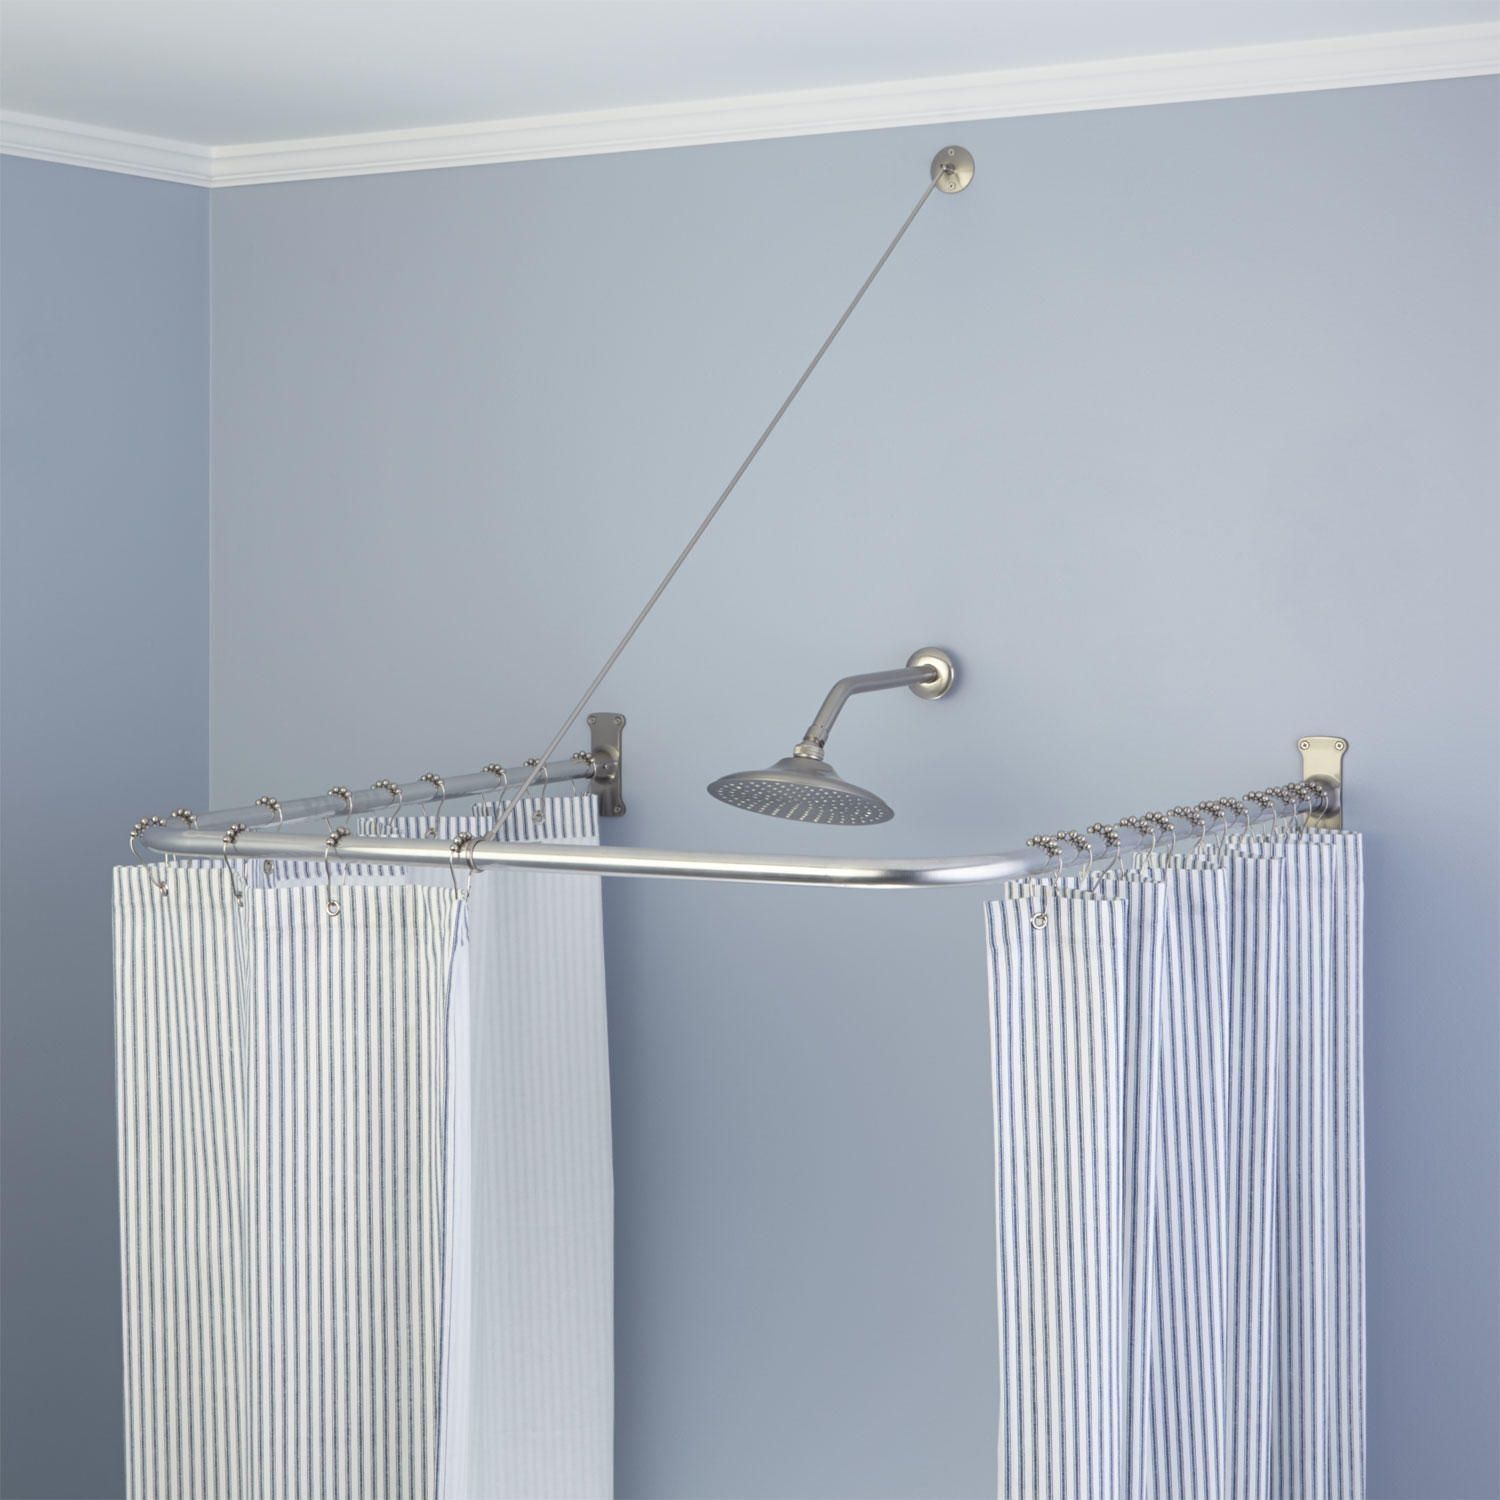 U Shaped Shower Curtain Rod Shower Curtain Rods Brushed Nickel Throughout L Shaped Shower Curtain Rods (View 10 of 25)